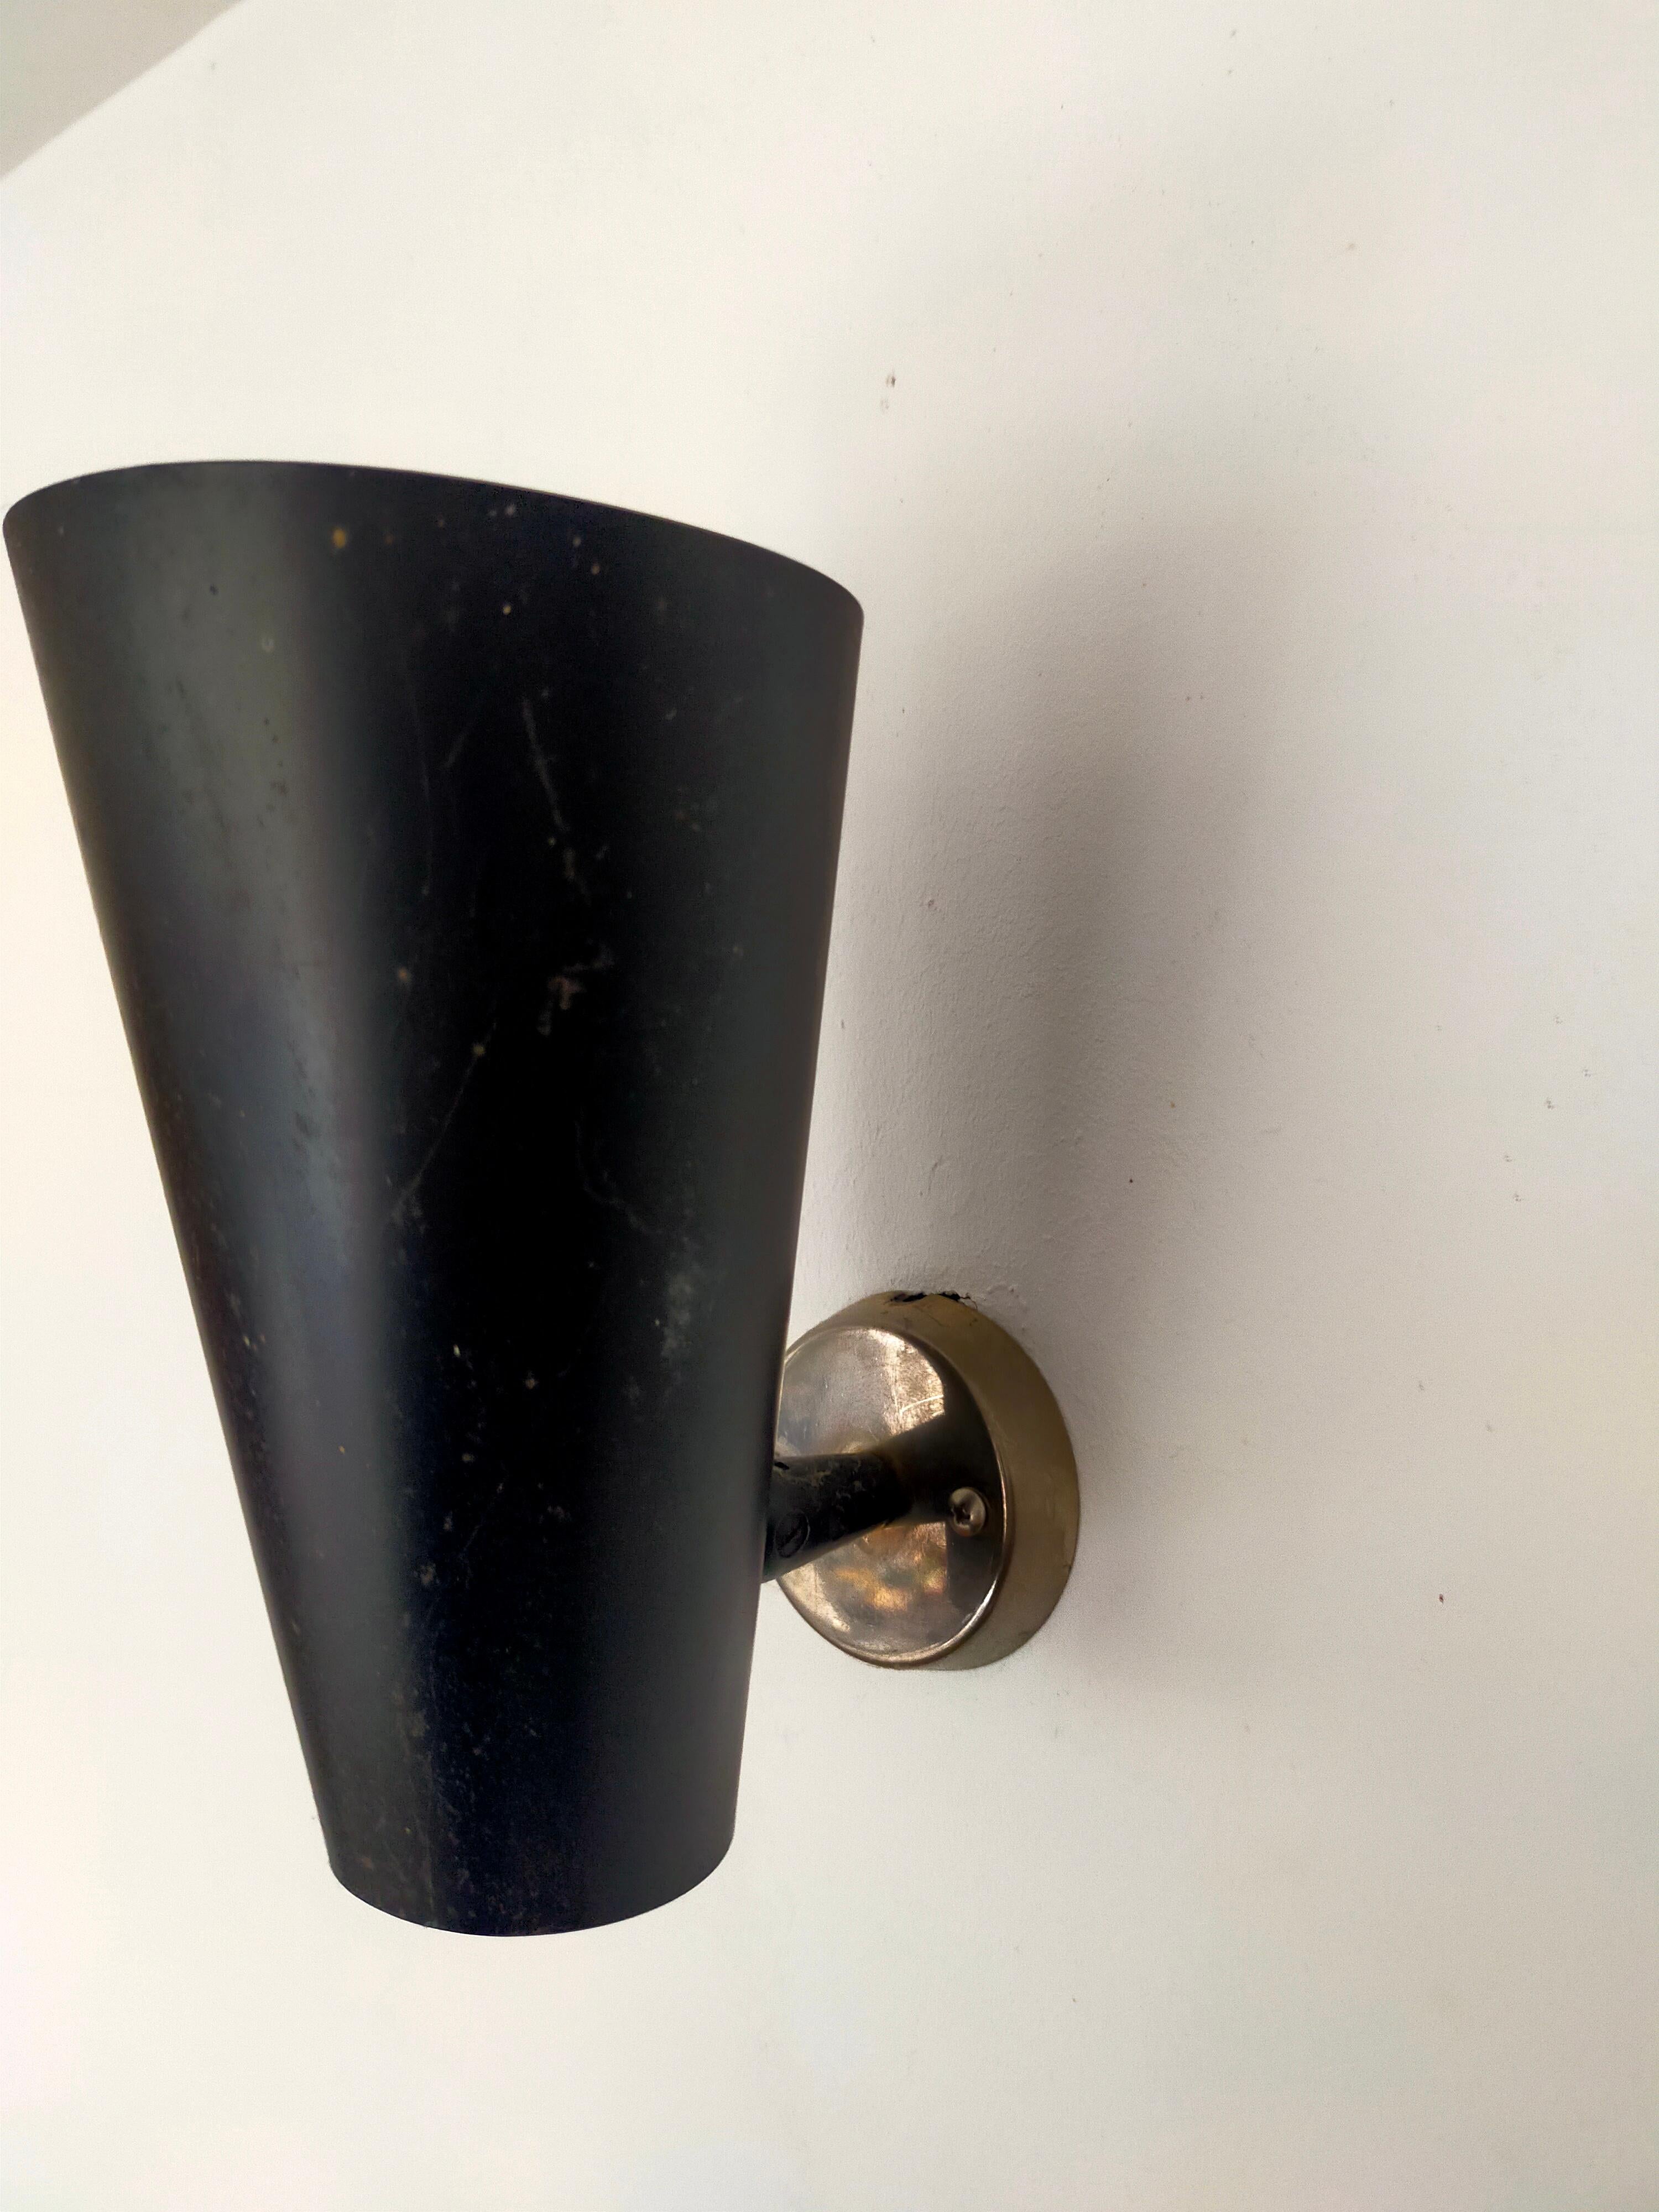 Conical black lacquered metal sconce by French manufacturer Lita.
Ball joint, reminiscent of Mouille's work with brass base.
Four pieces available.